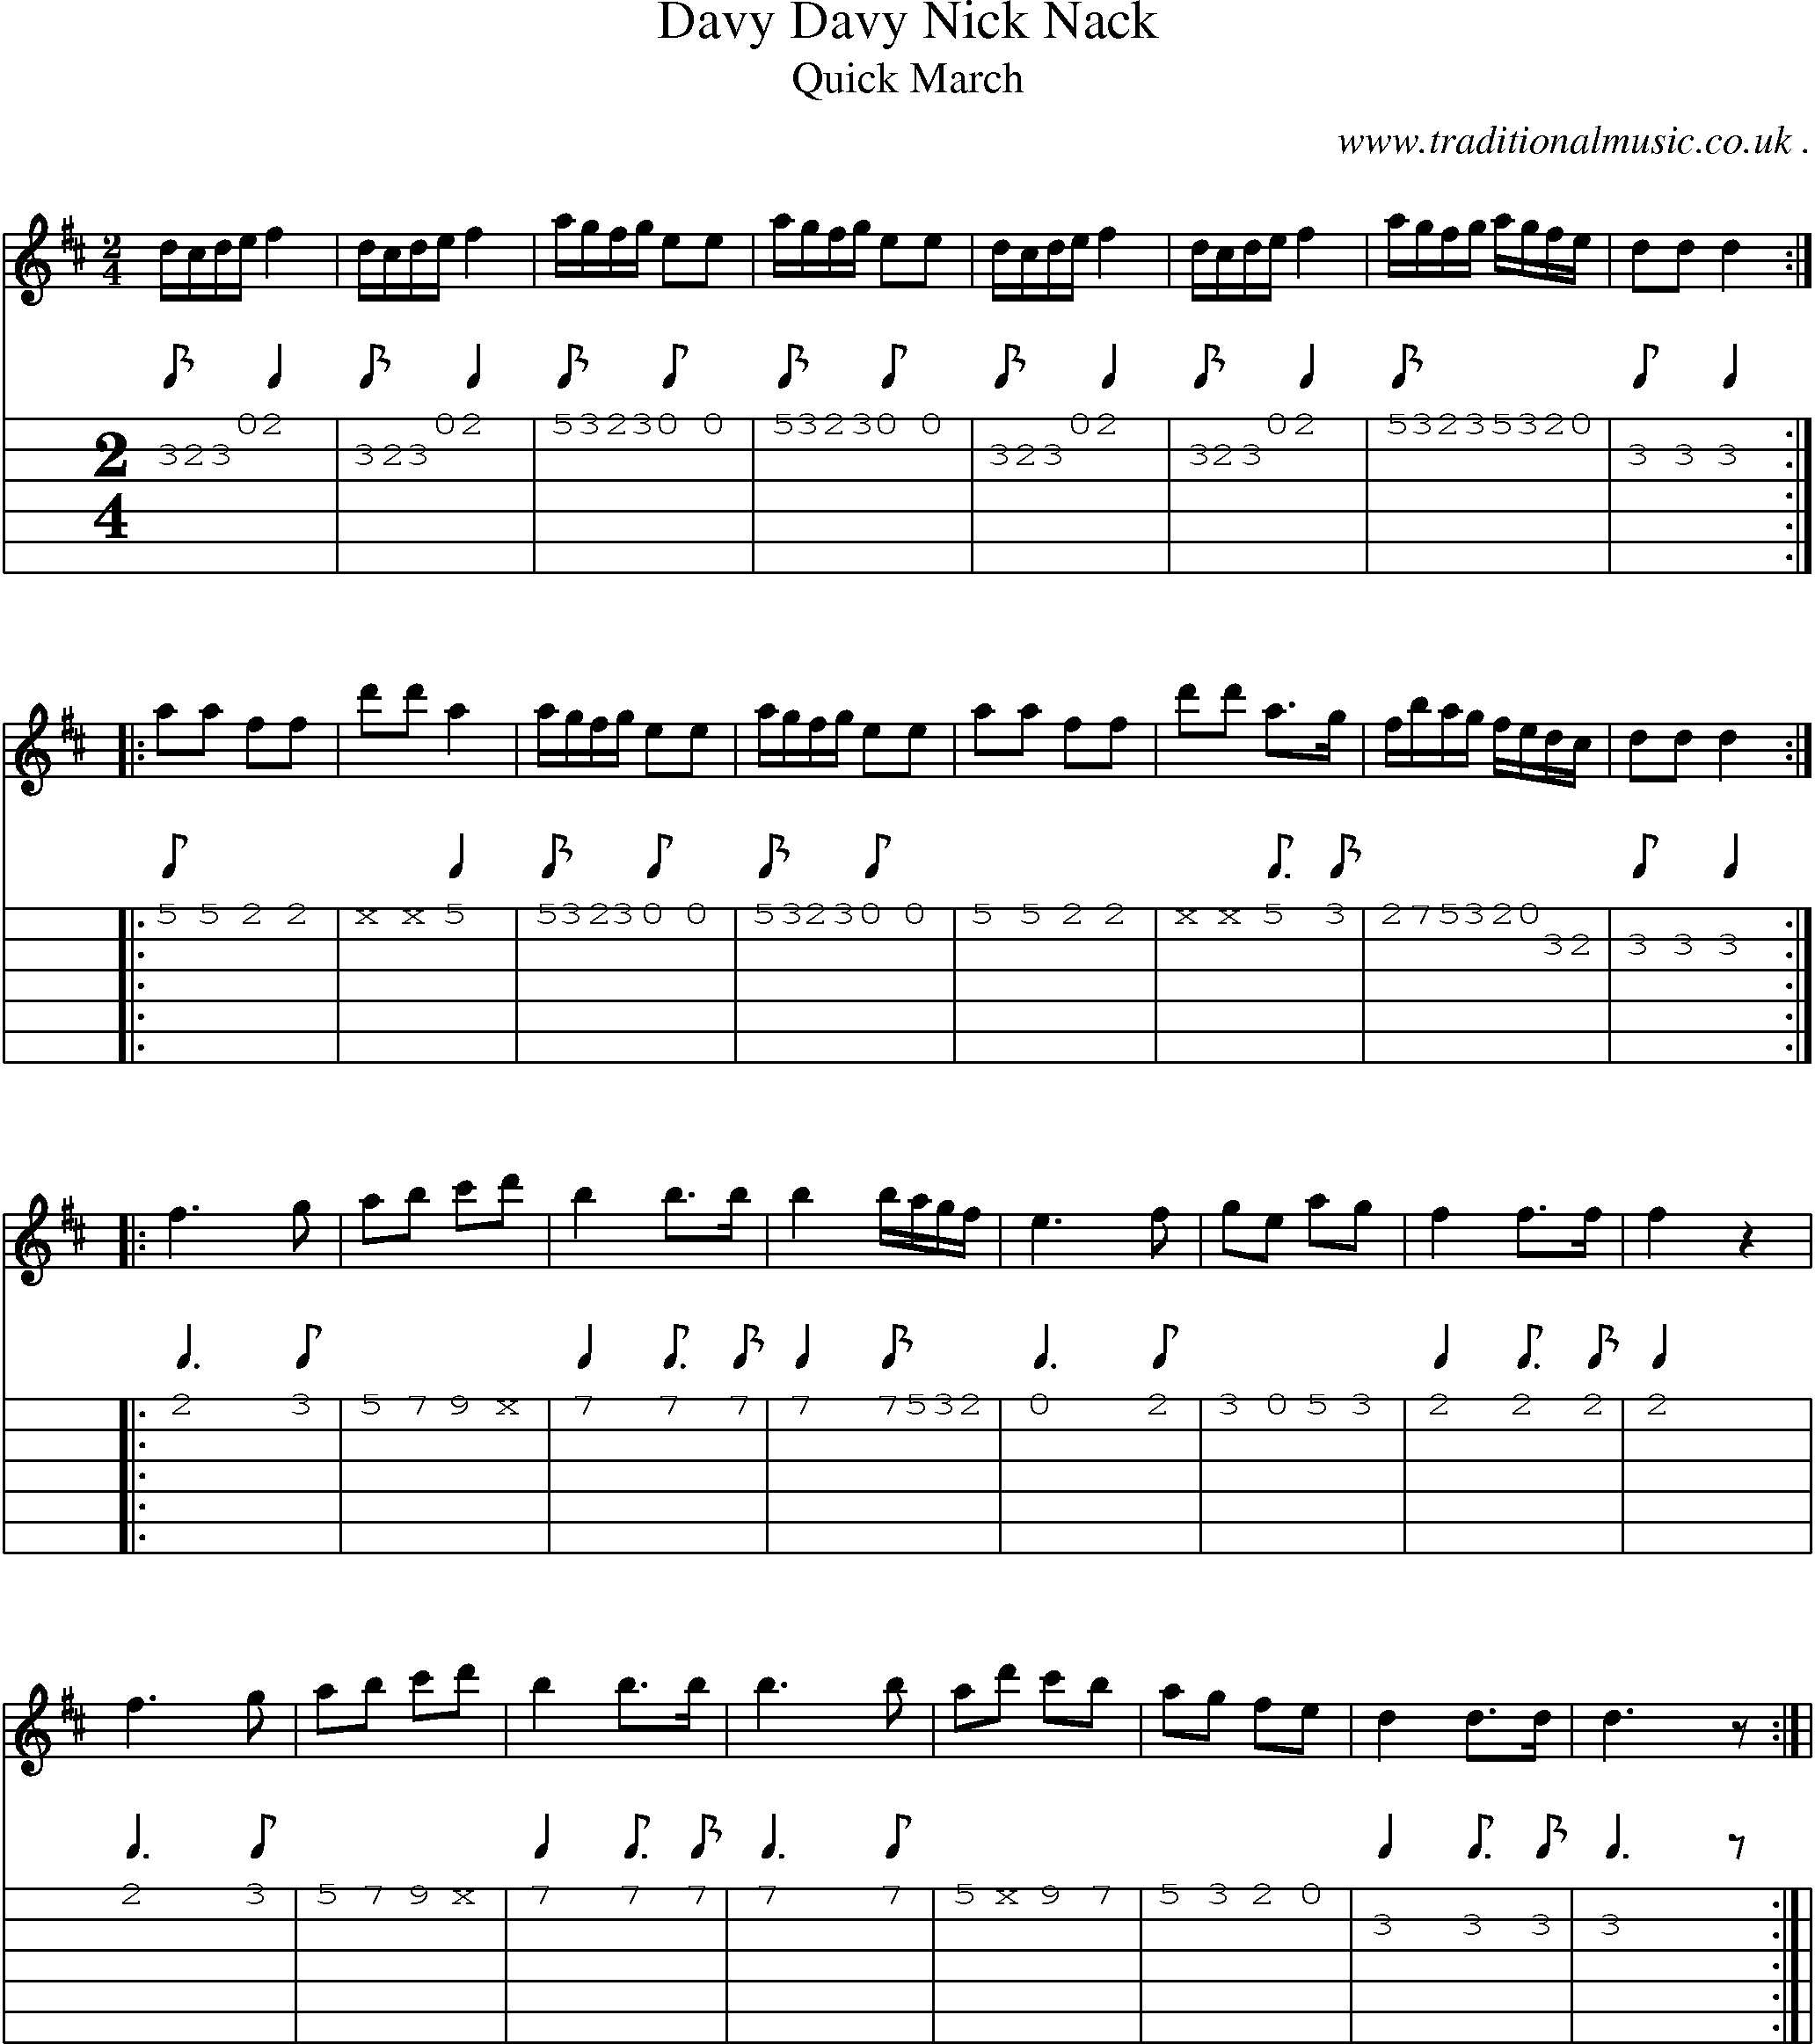 Sheet-Music and Guitar Tabs for Davy Davy Nick Nack